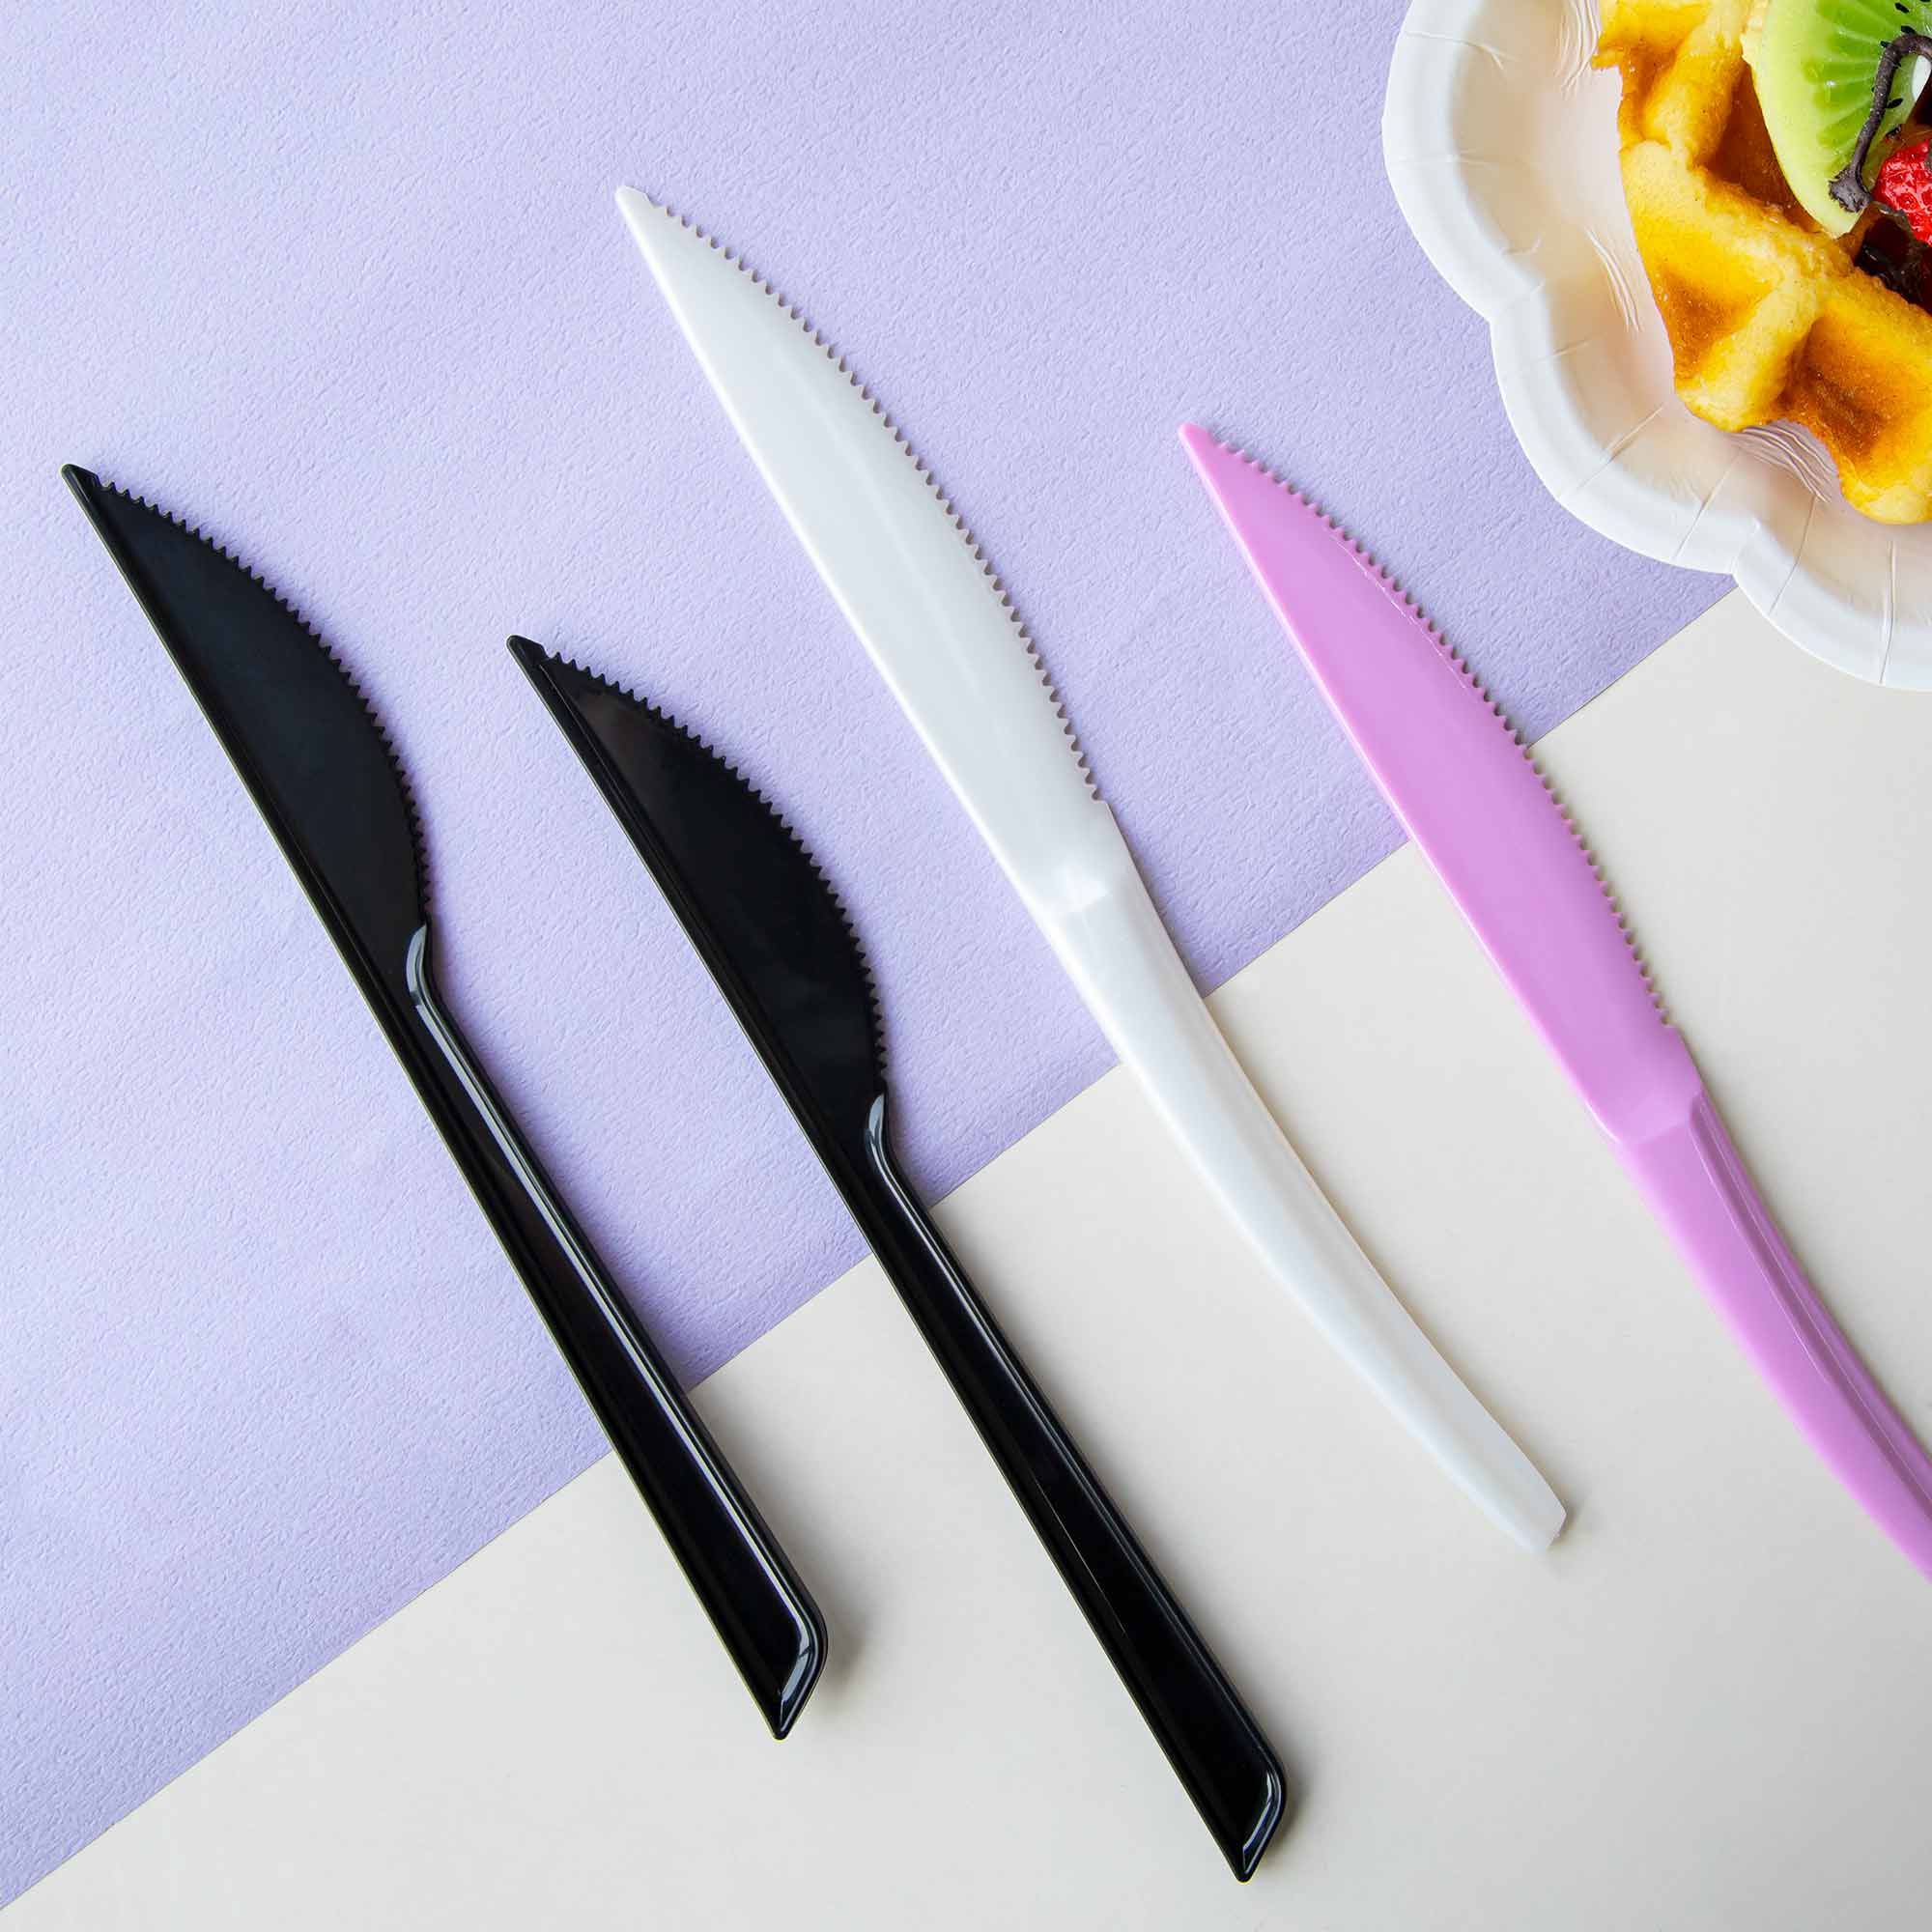 Plastic Knife - Disposable Knives, Colorful Knives, Custom Plastic Cutlery  Design & Plastic Tableware Manufacturing